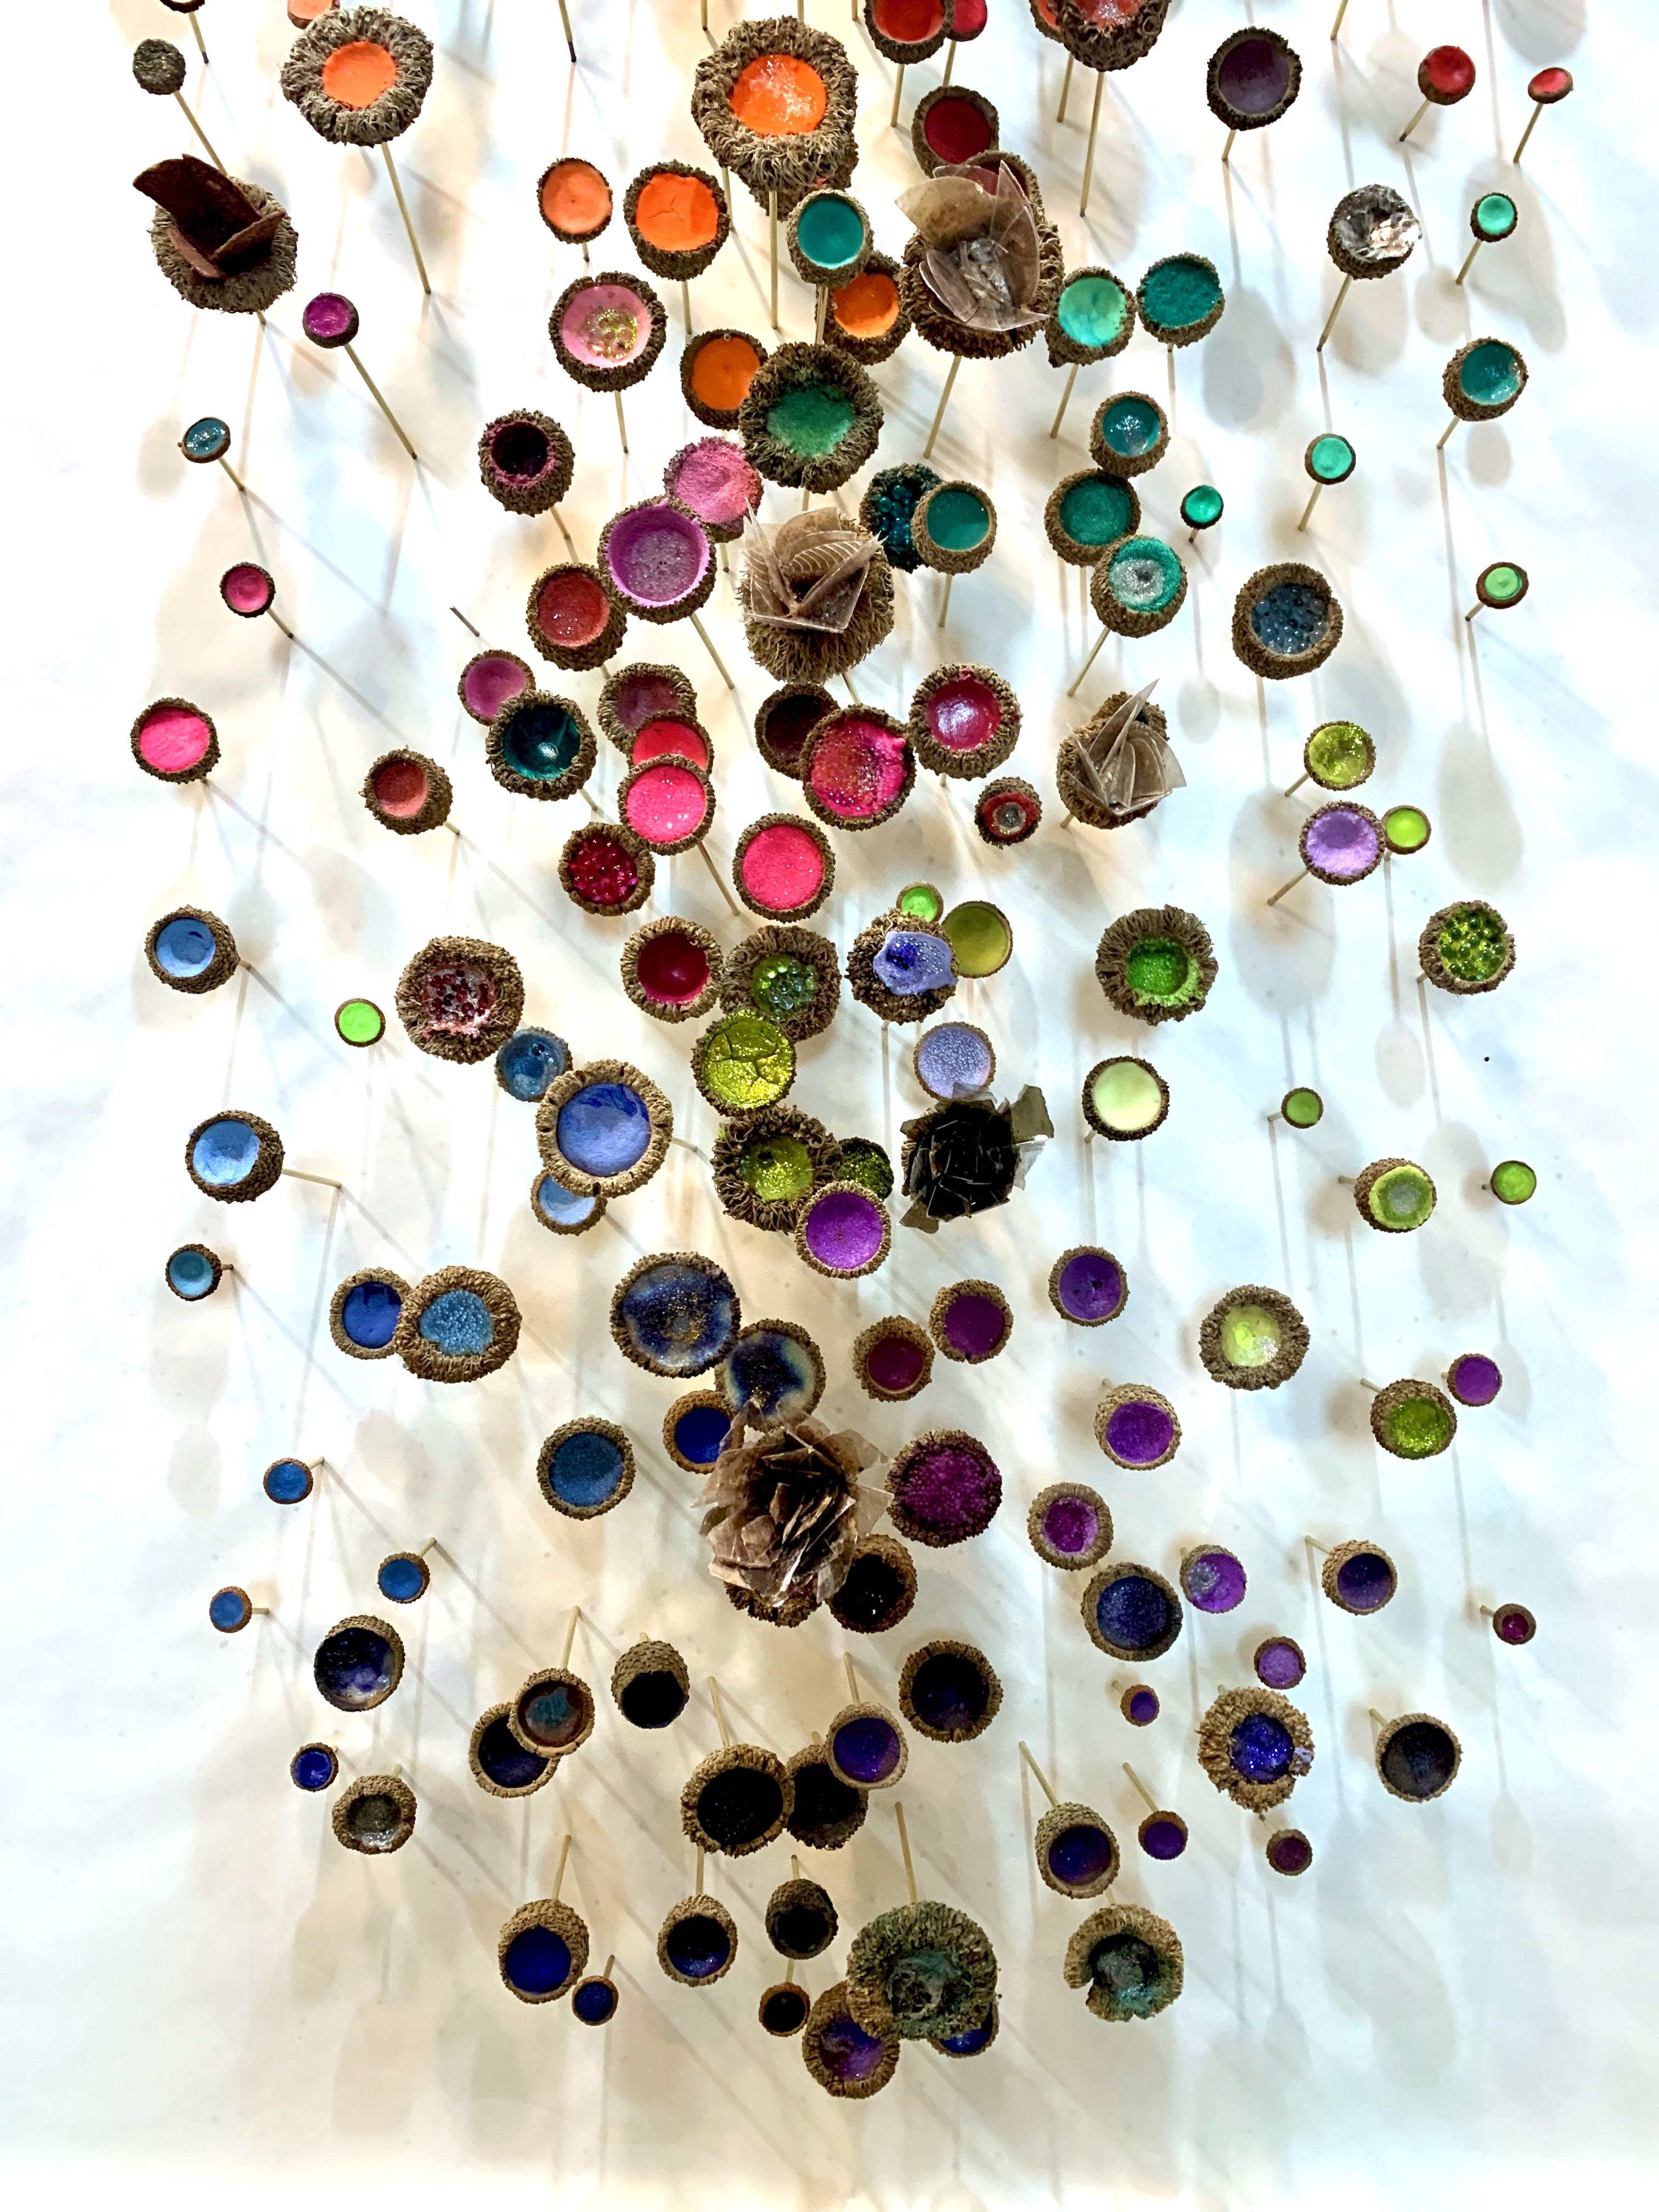 Large, vertical wall sculpture consisting of a meandering installation of acorn caps on brass pins filled with acrylic paint, natural crystals and mica, glass, glitter, brass, and synthetic materials in bright shades of luminous yellow, pink,